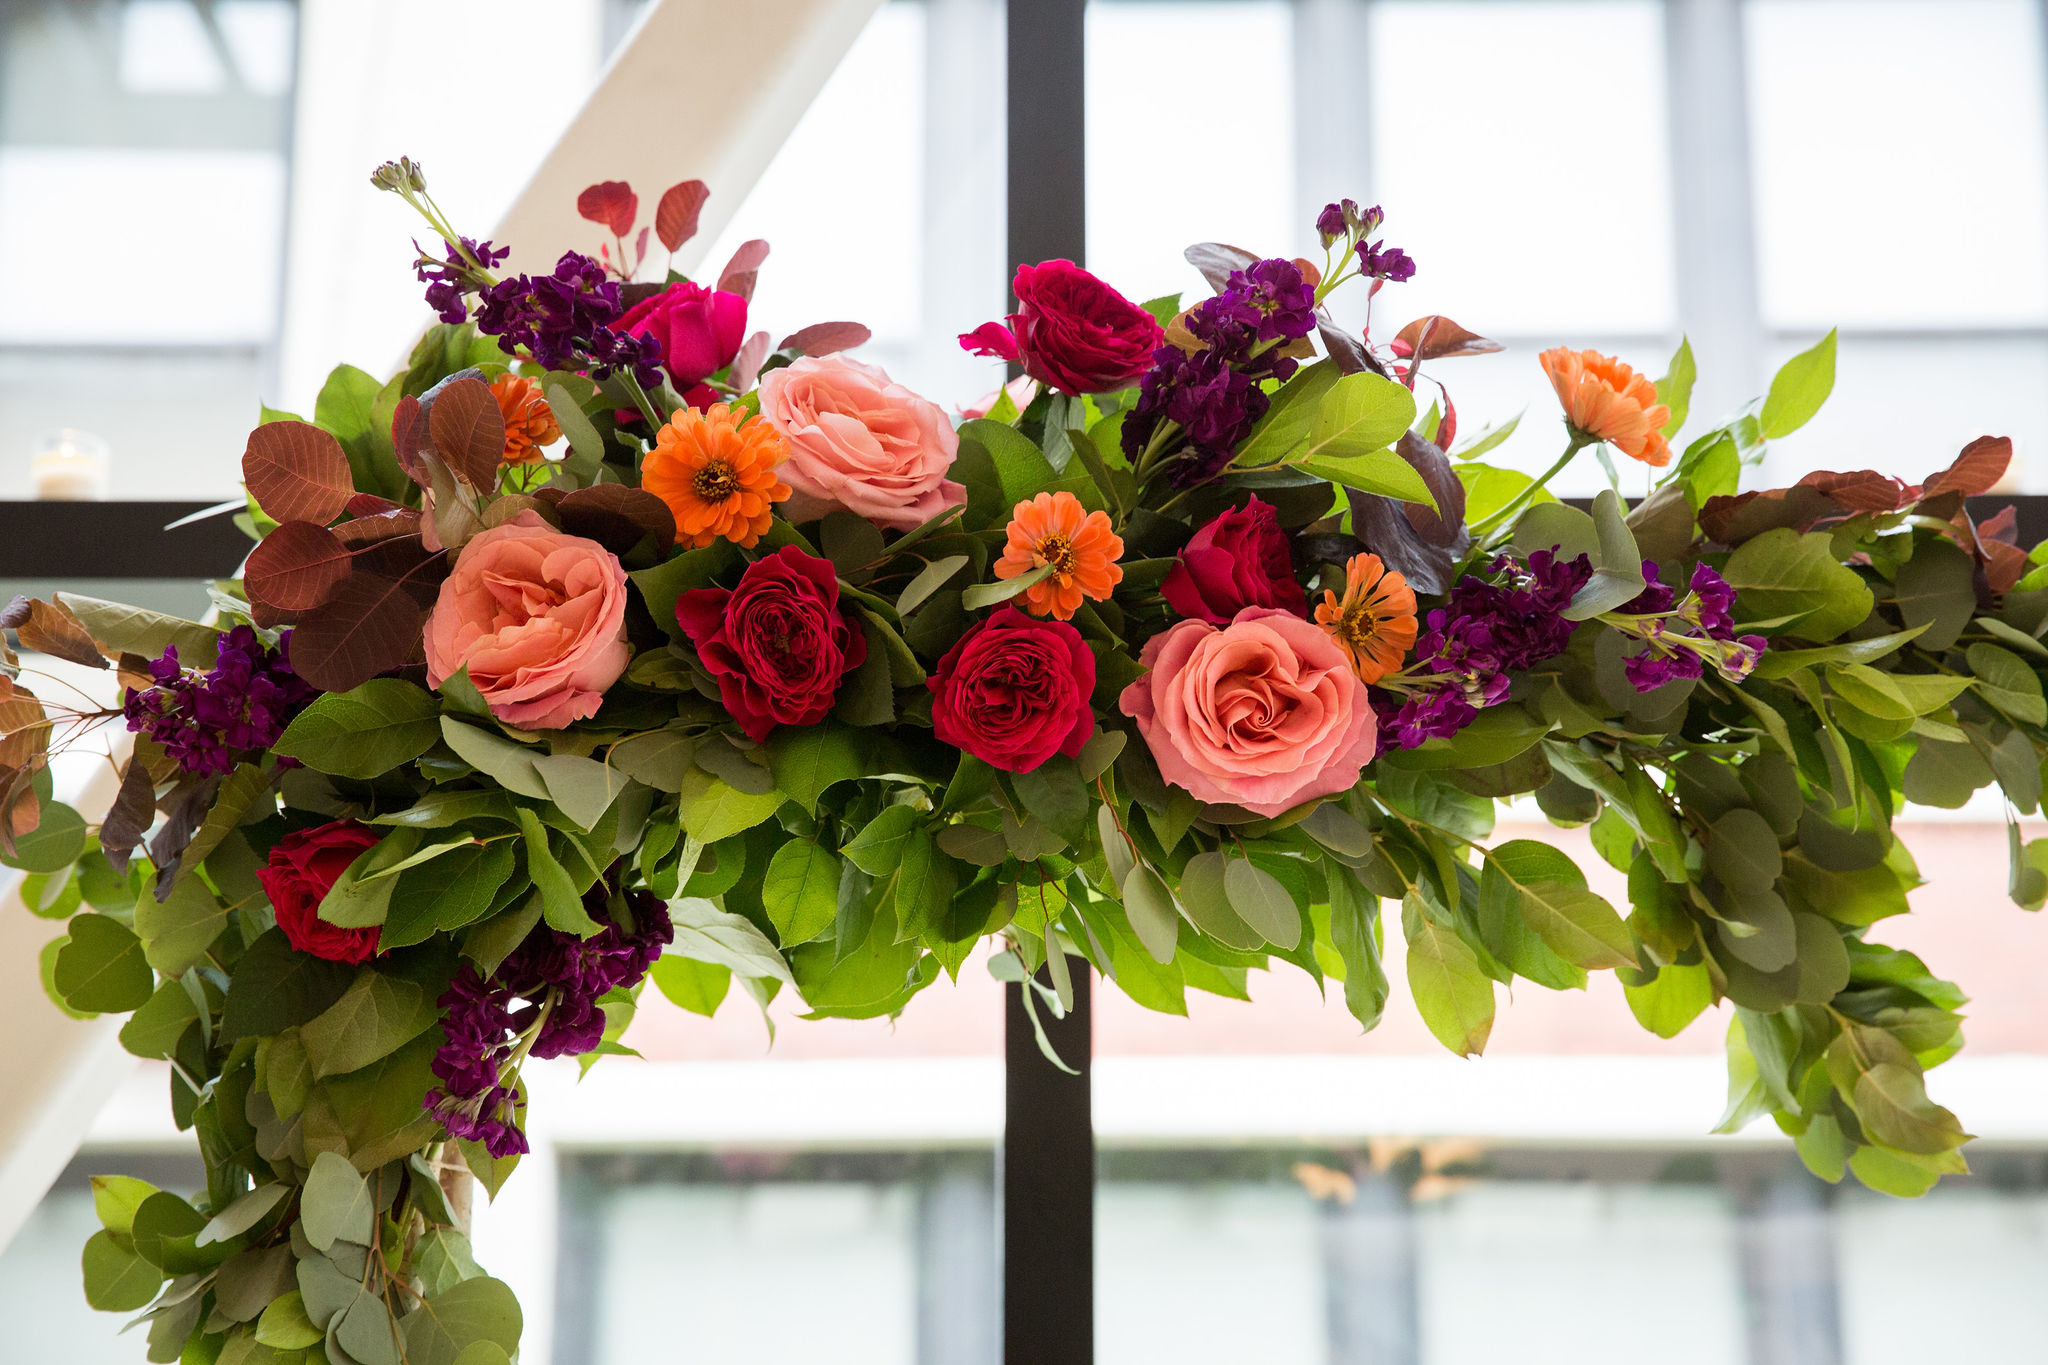 Greenhouse Loft bright summer wedding ceremony altar with colorful arrangement of pink garden roses, orange zinnias, and purple stock.